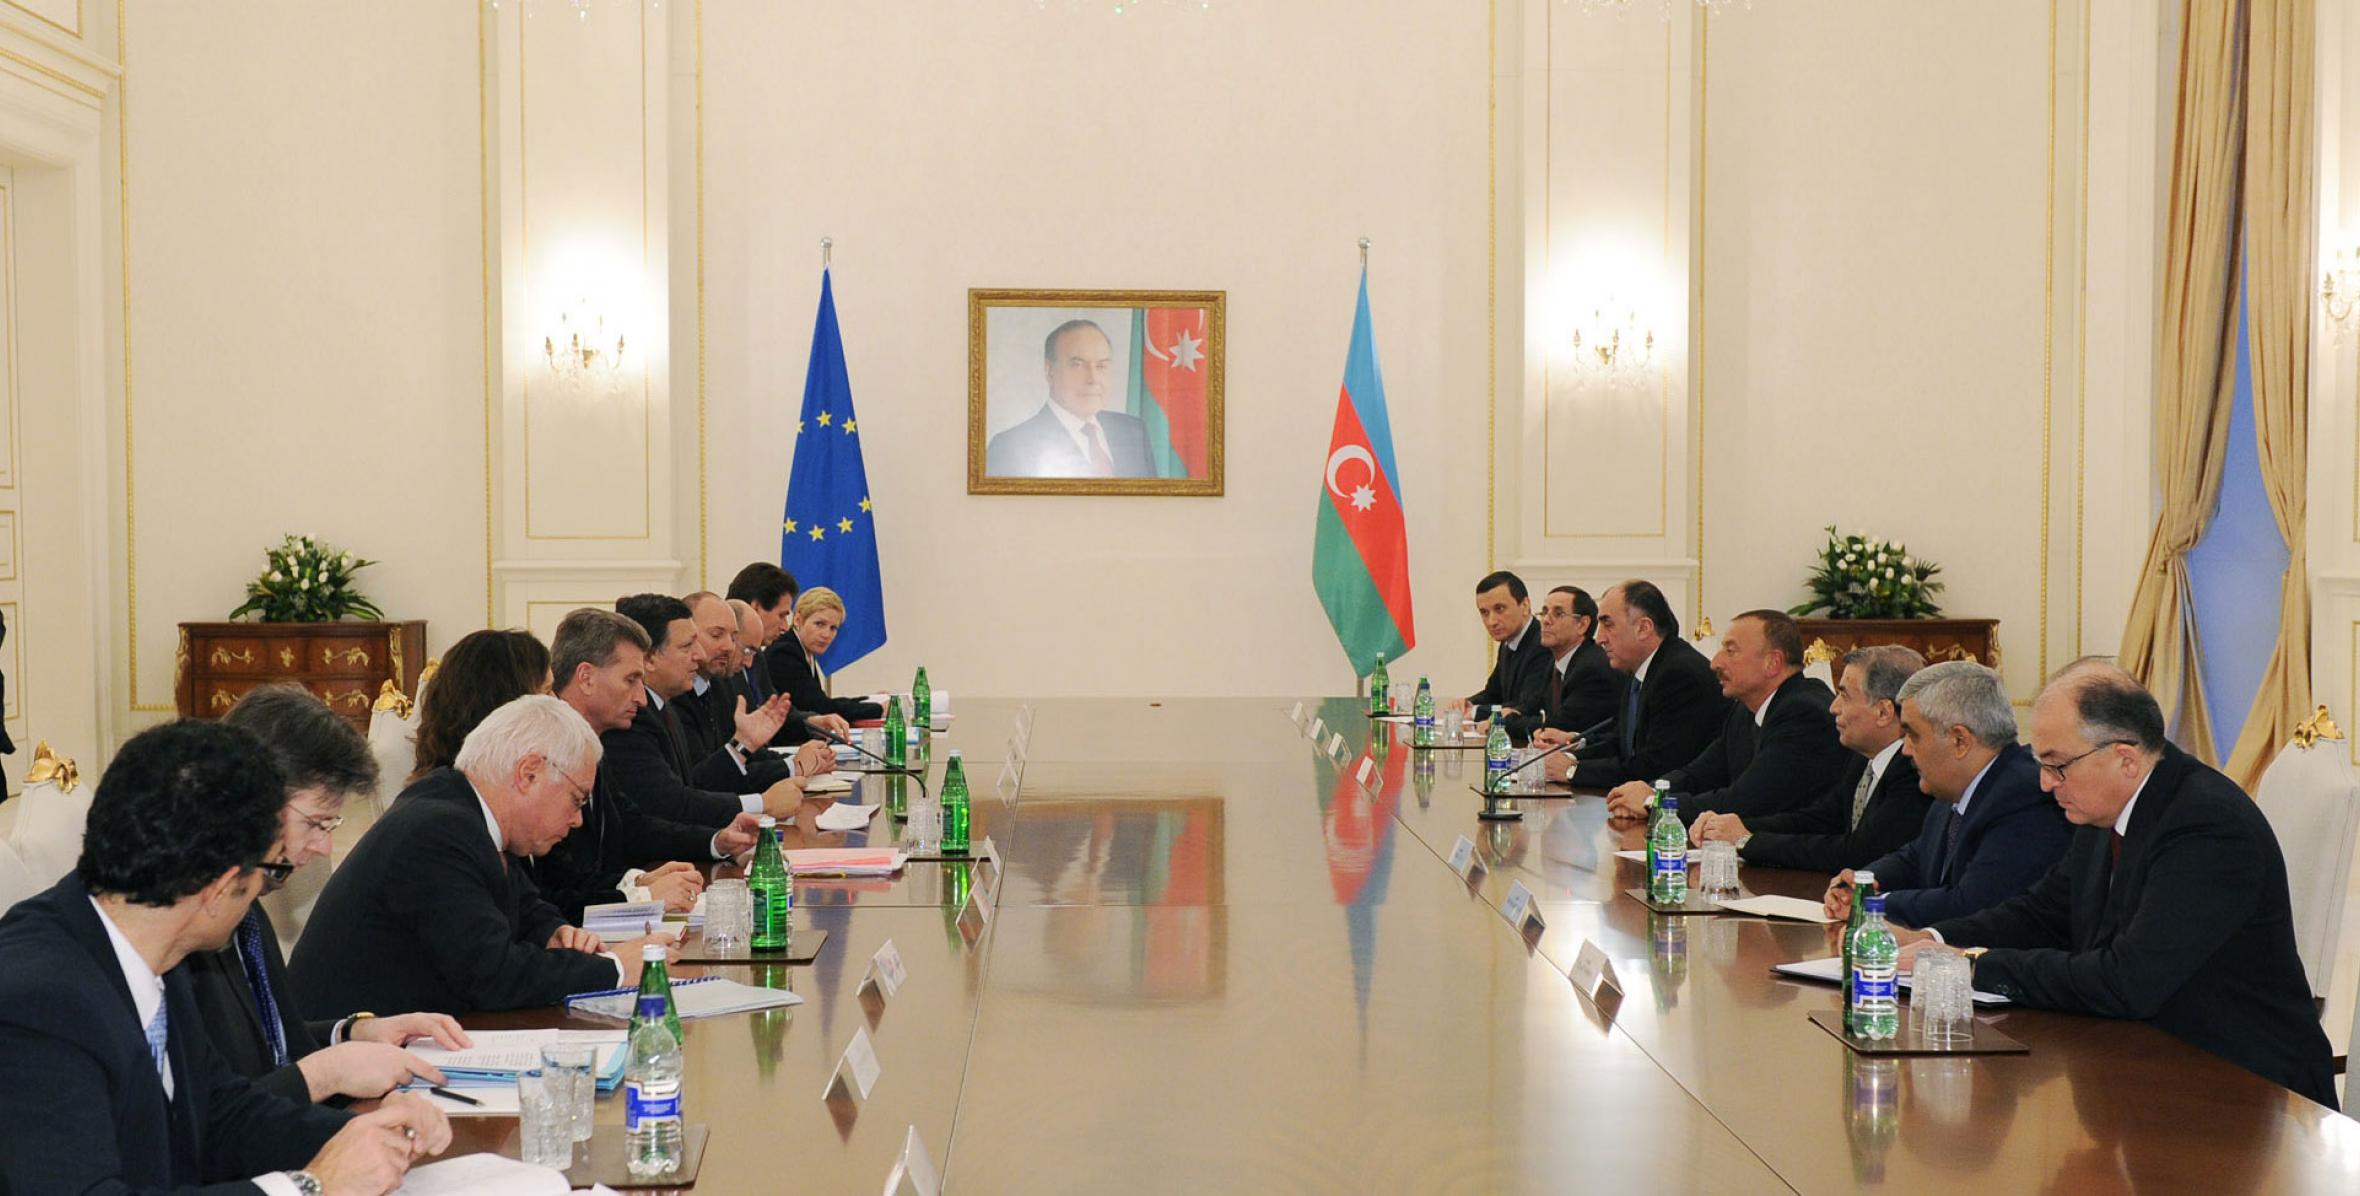 Ilham Aliyev and José Manuel Barroso had a meeting with the participation of delegations